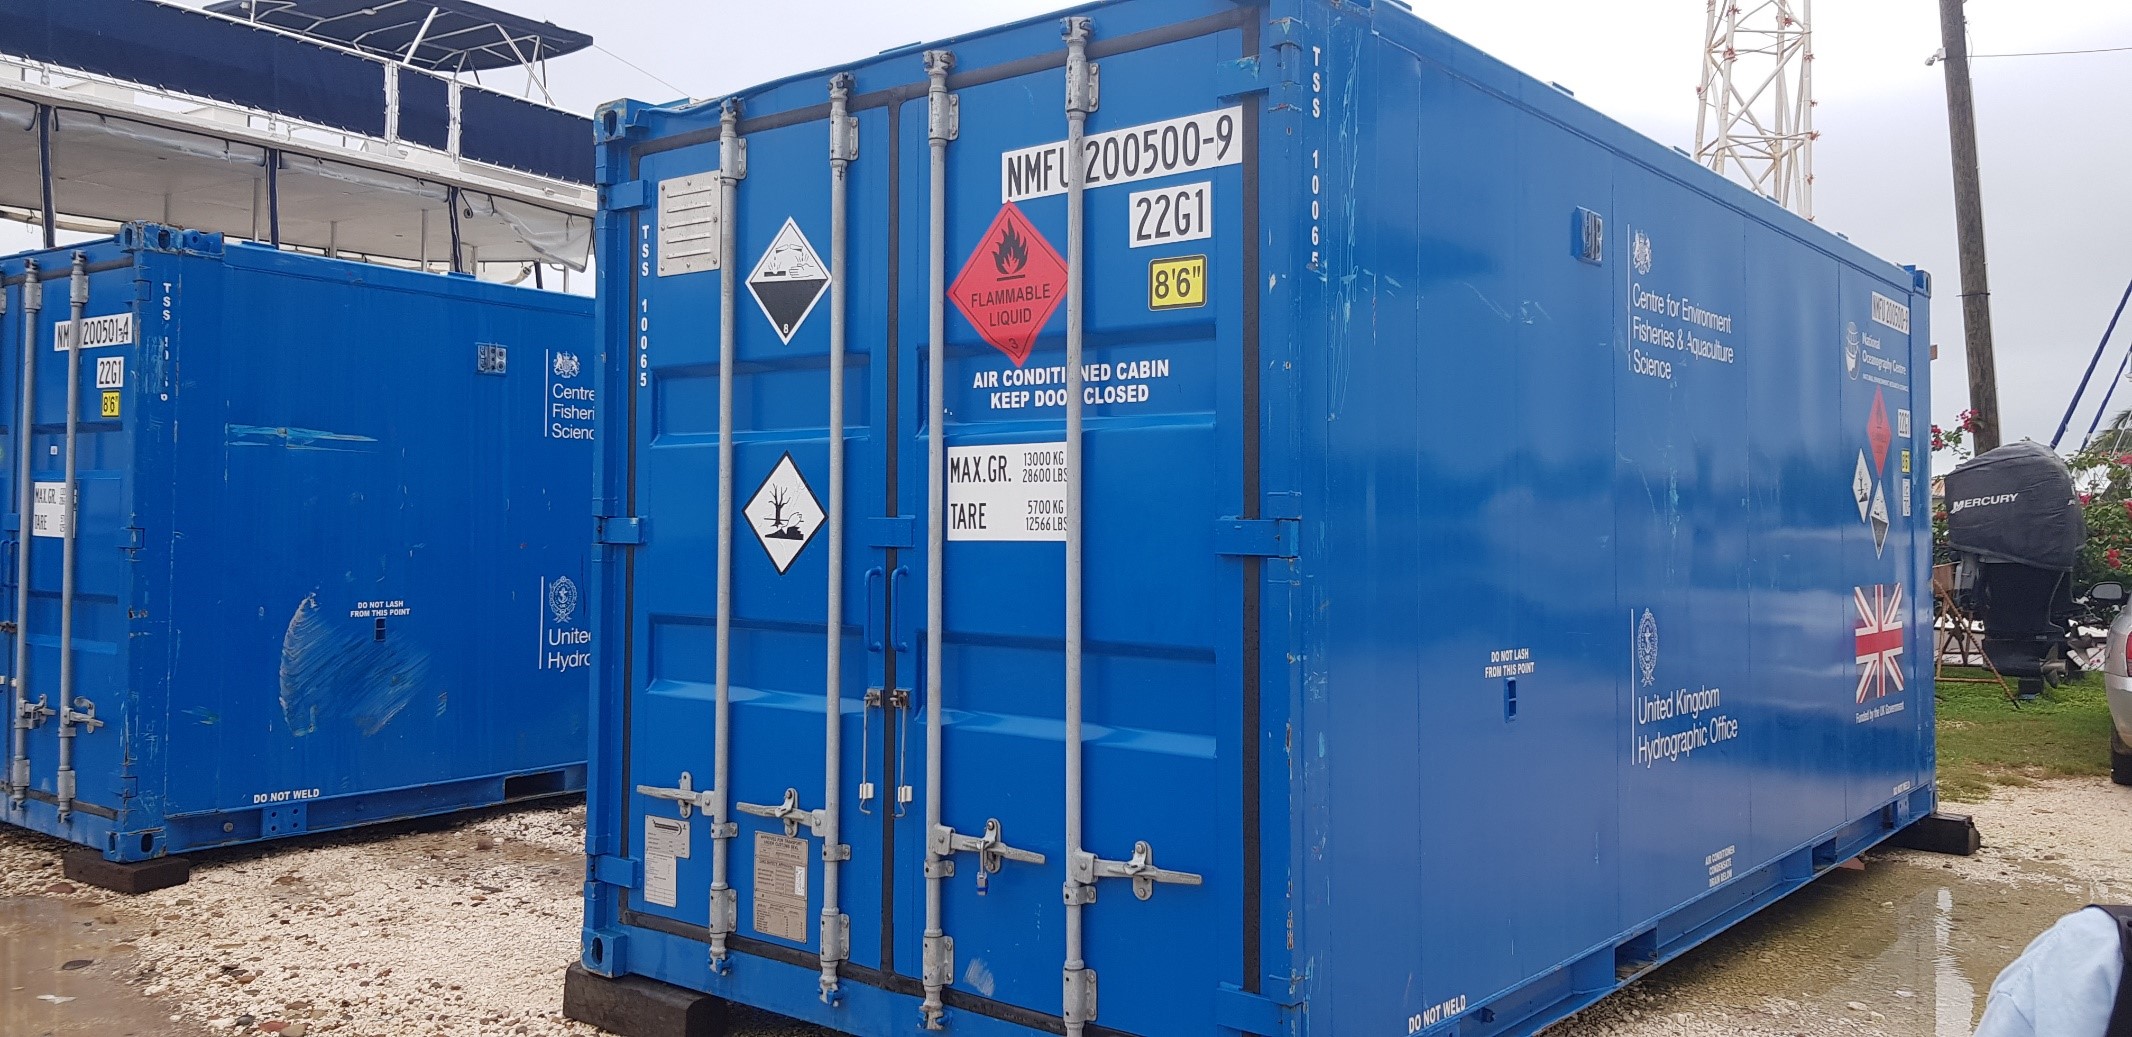 Operations and Workshop containers on site in Belize Marina 2019